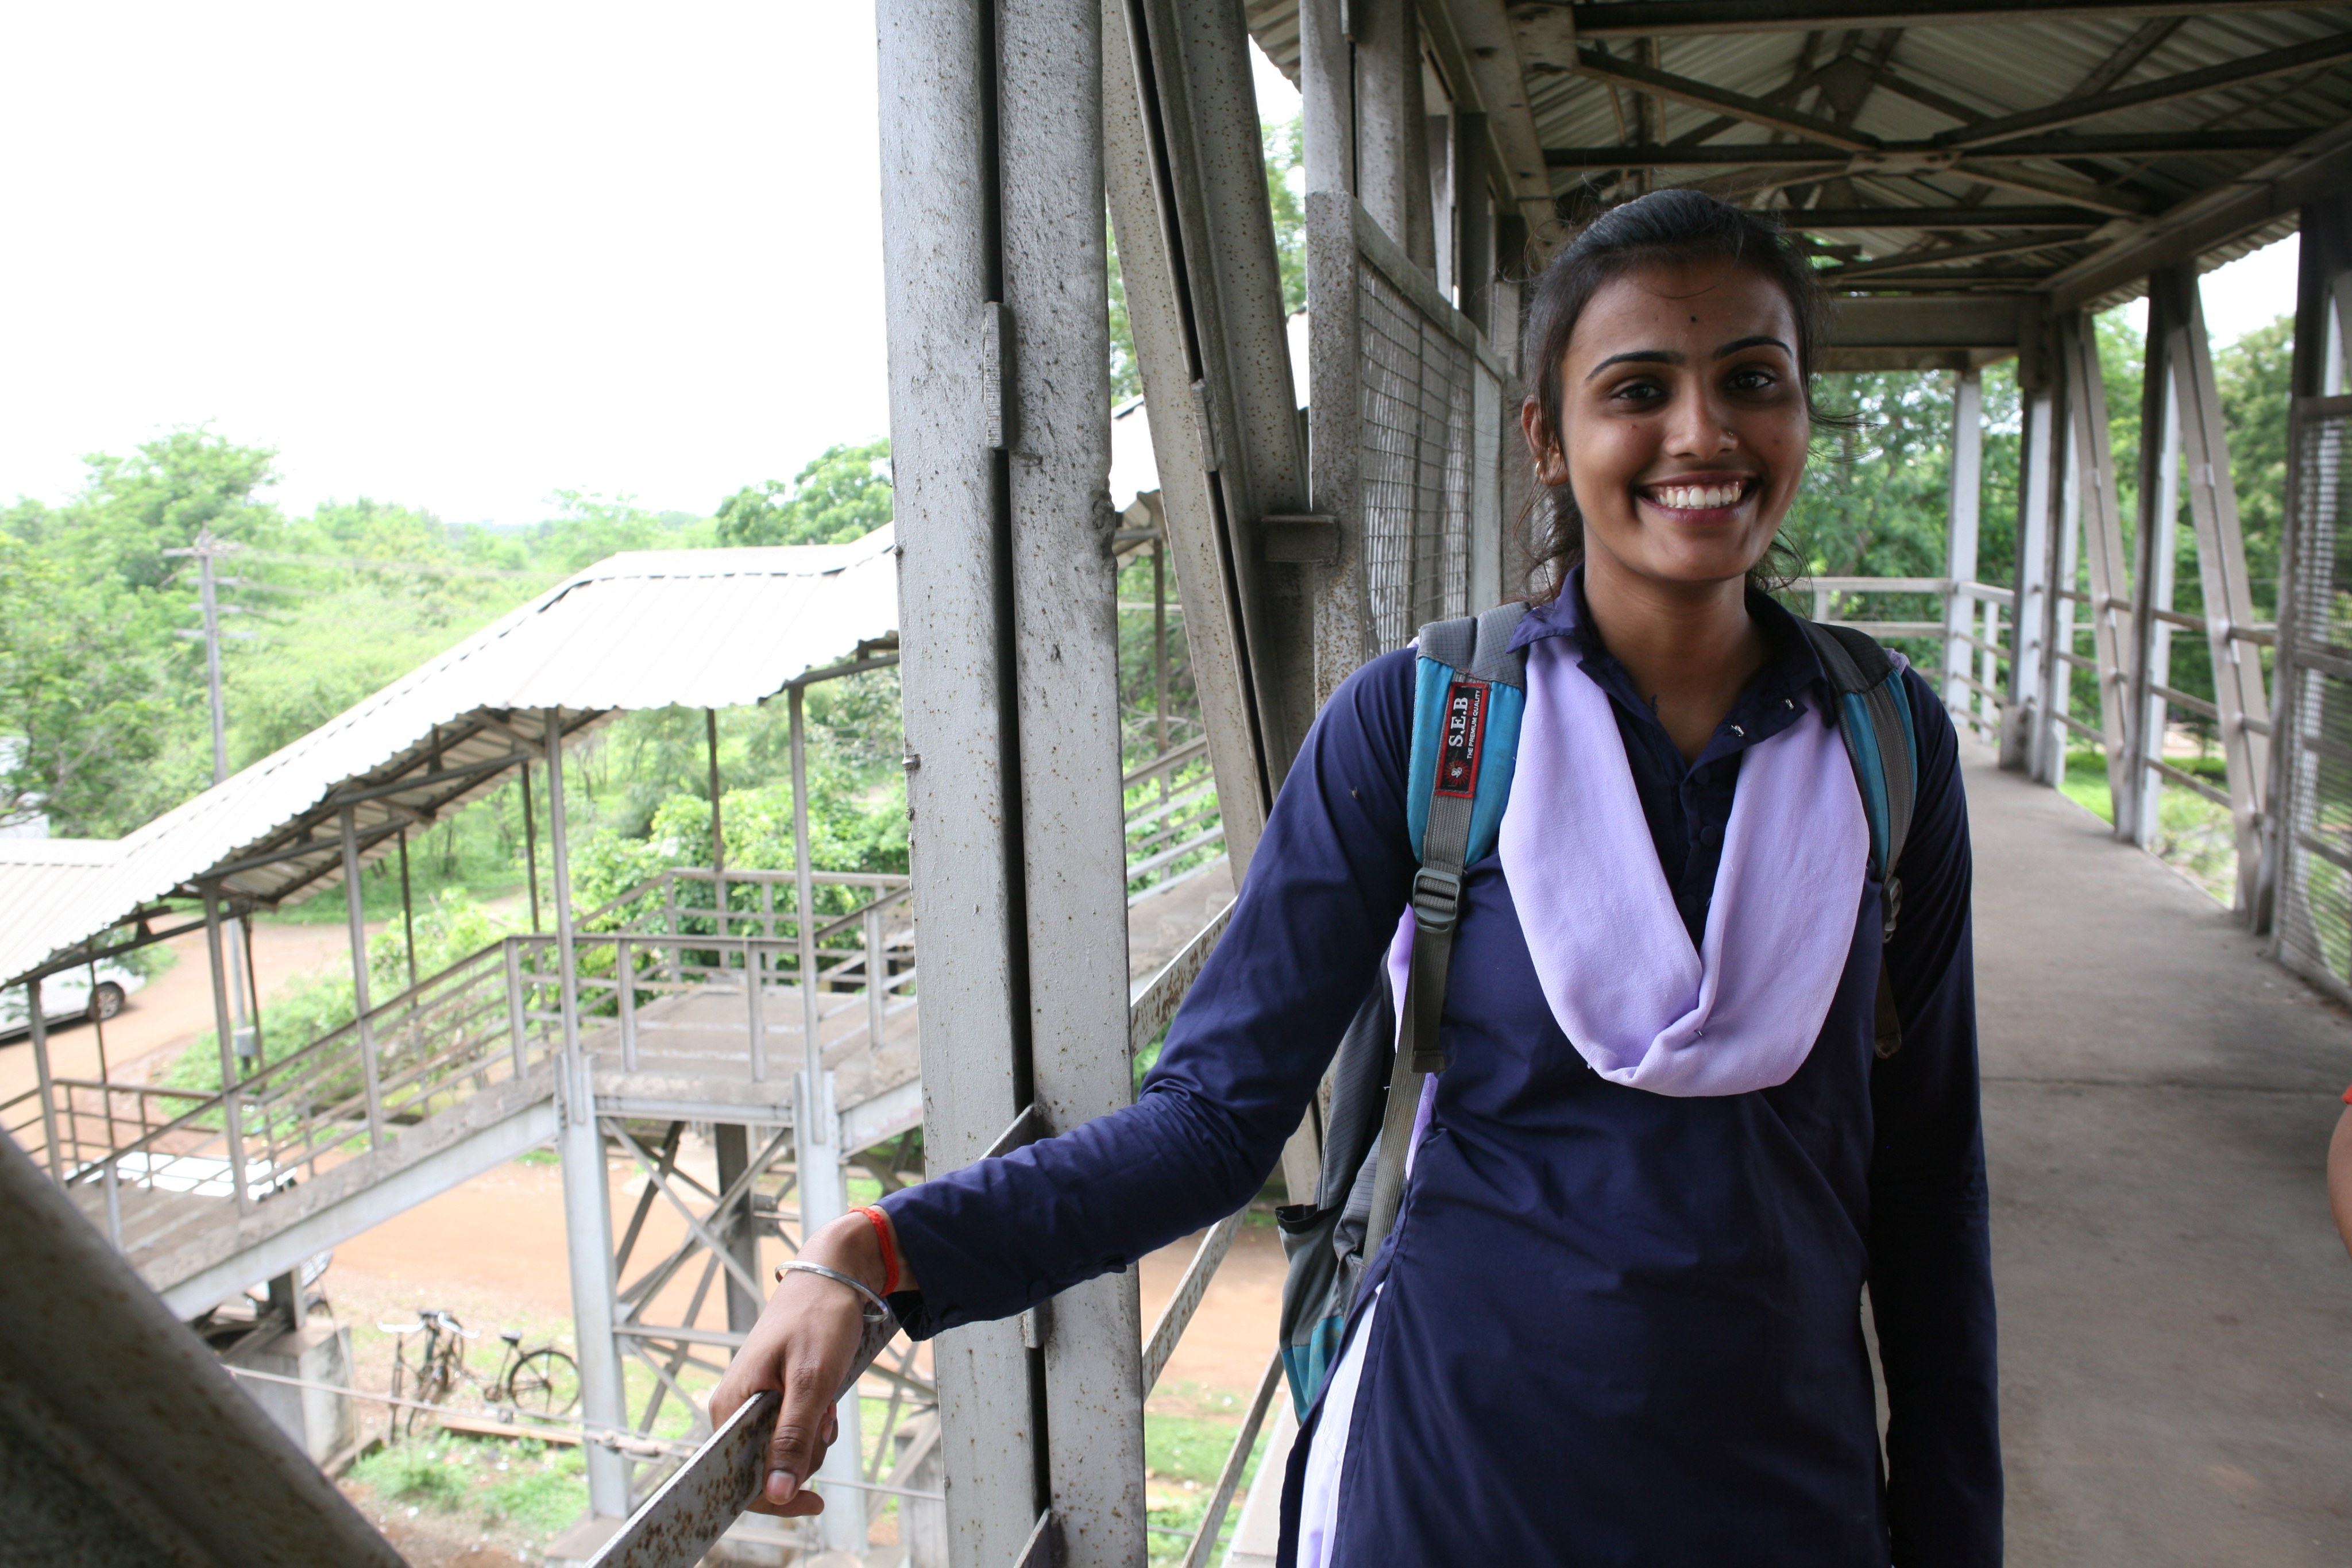 Yashika from India is one of the inspiring young women whose stories feature in Room to Read’s She Creates Change campaign, which aims to encourage girls to “shape their future”. Photo: Room to Read